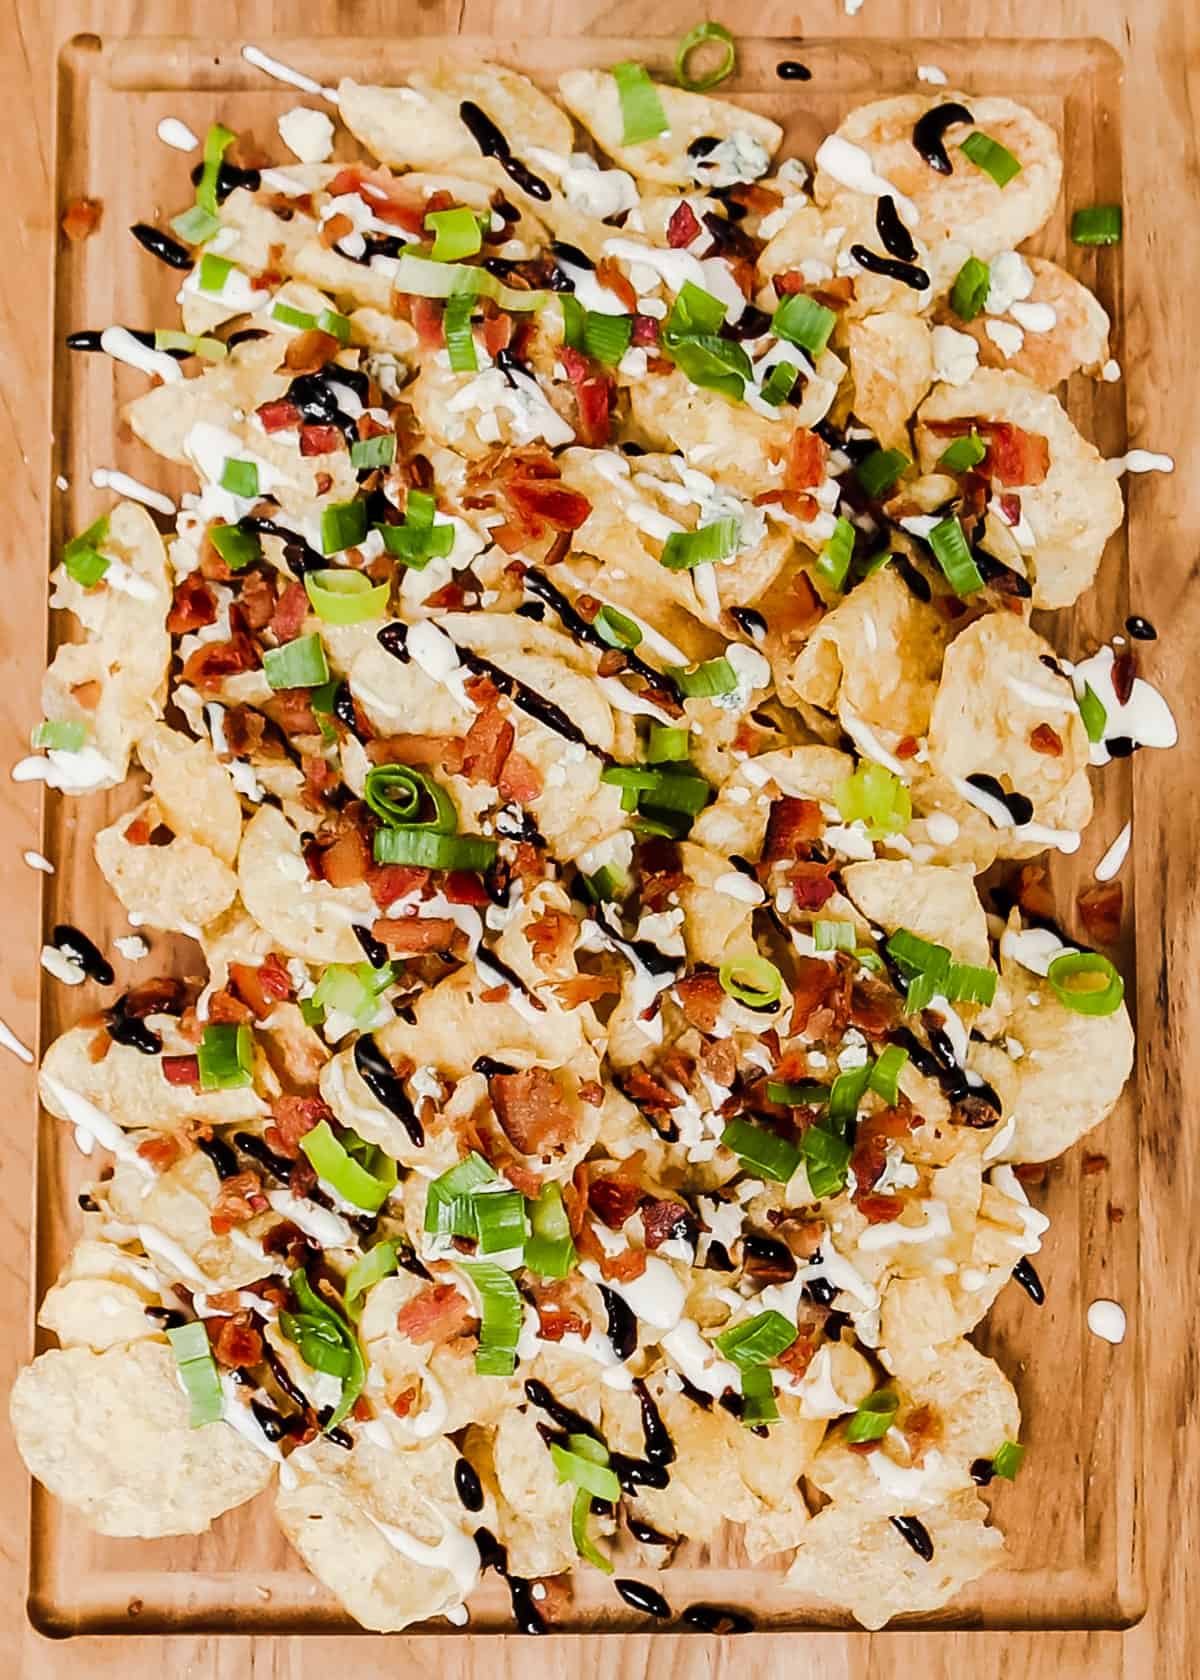 piles of potato chips topped with bacon, green onion, white sauce and balsamic glaze, on wood serving board.